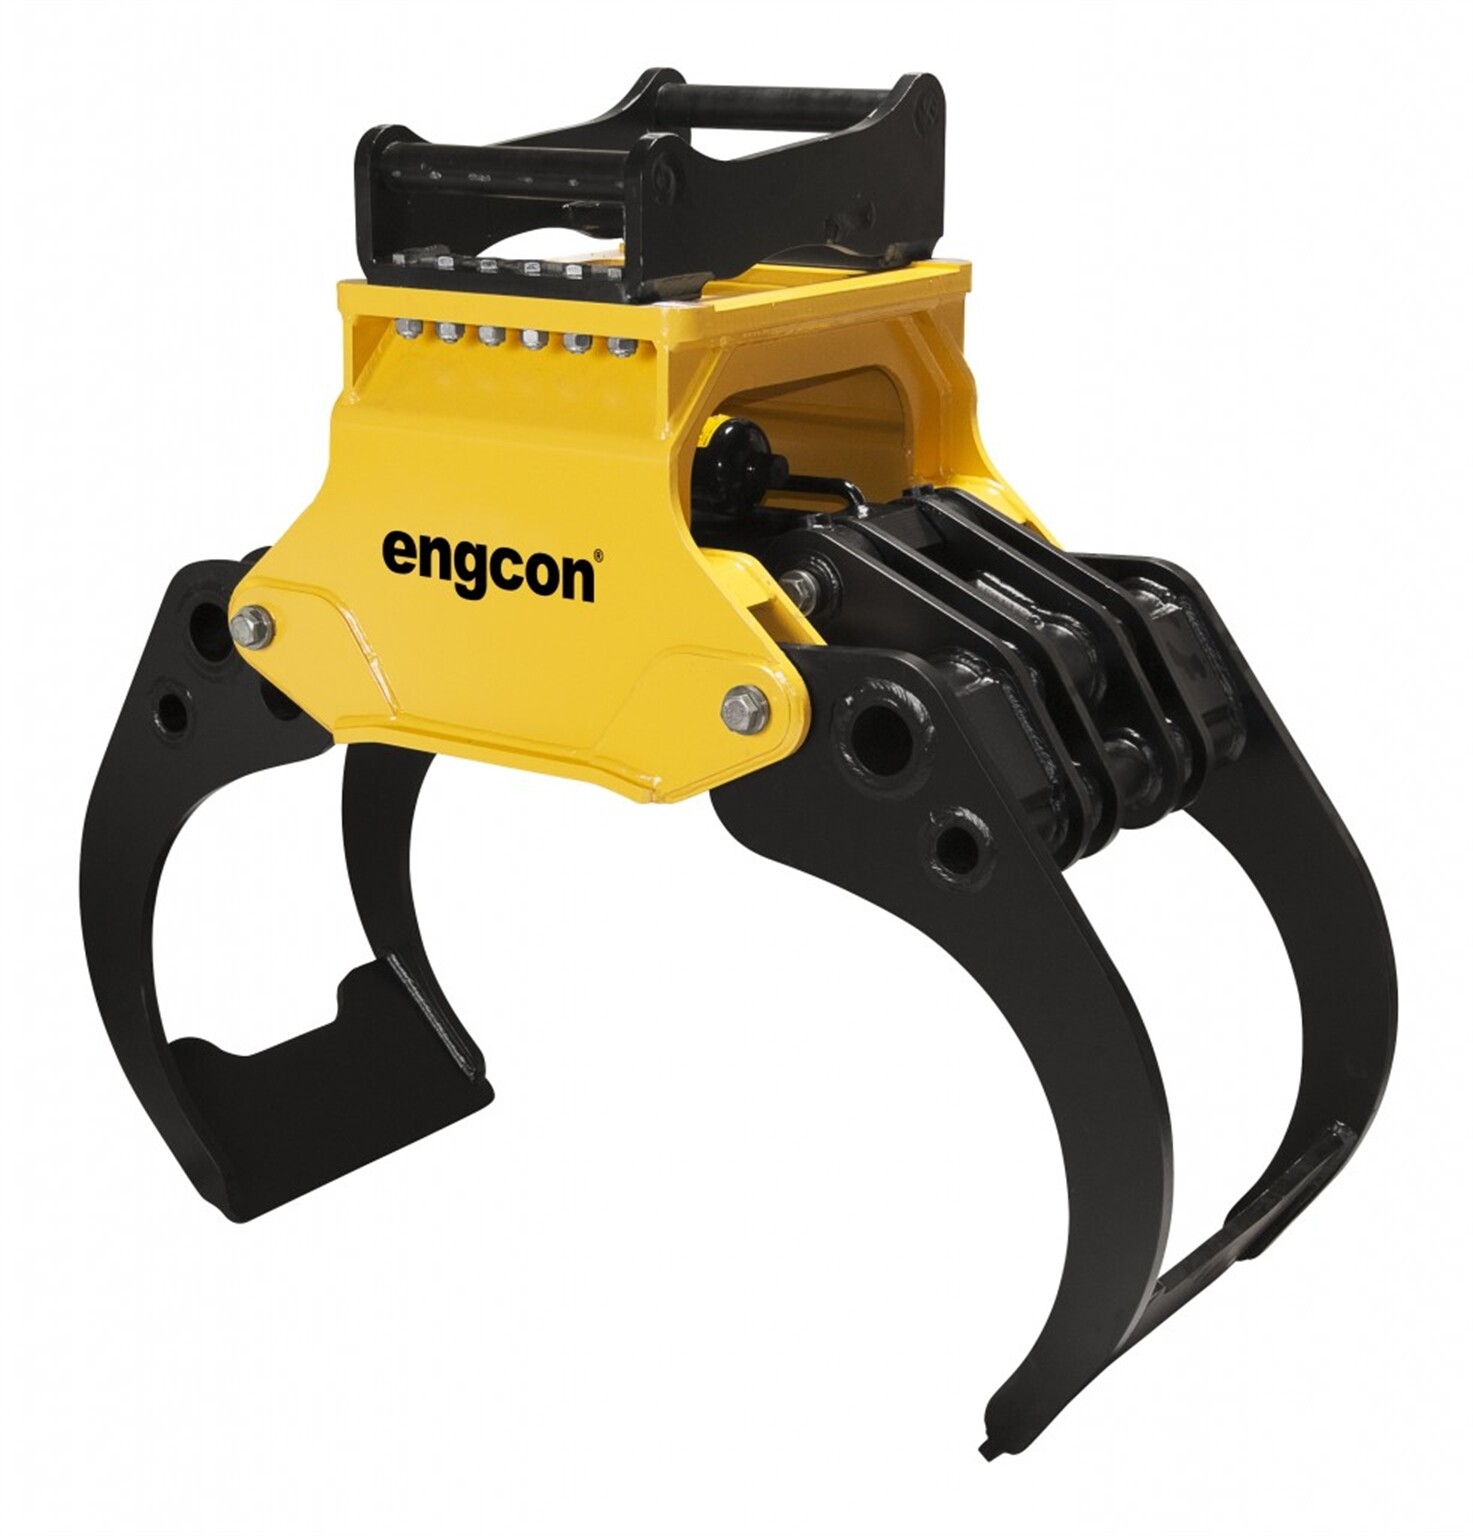 Get a grip with Engcon timber grabs